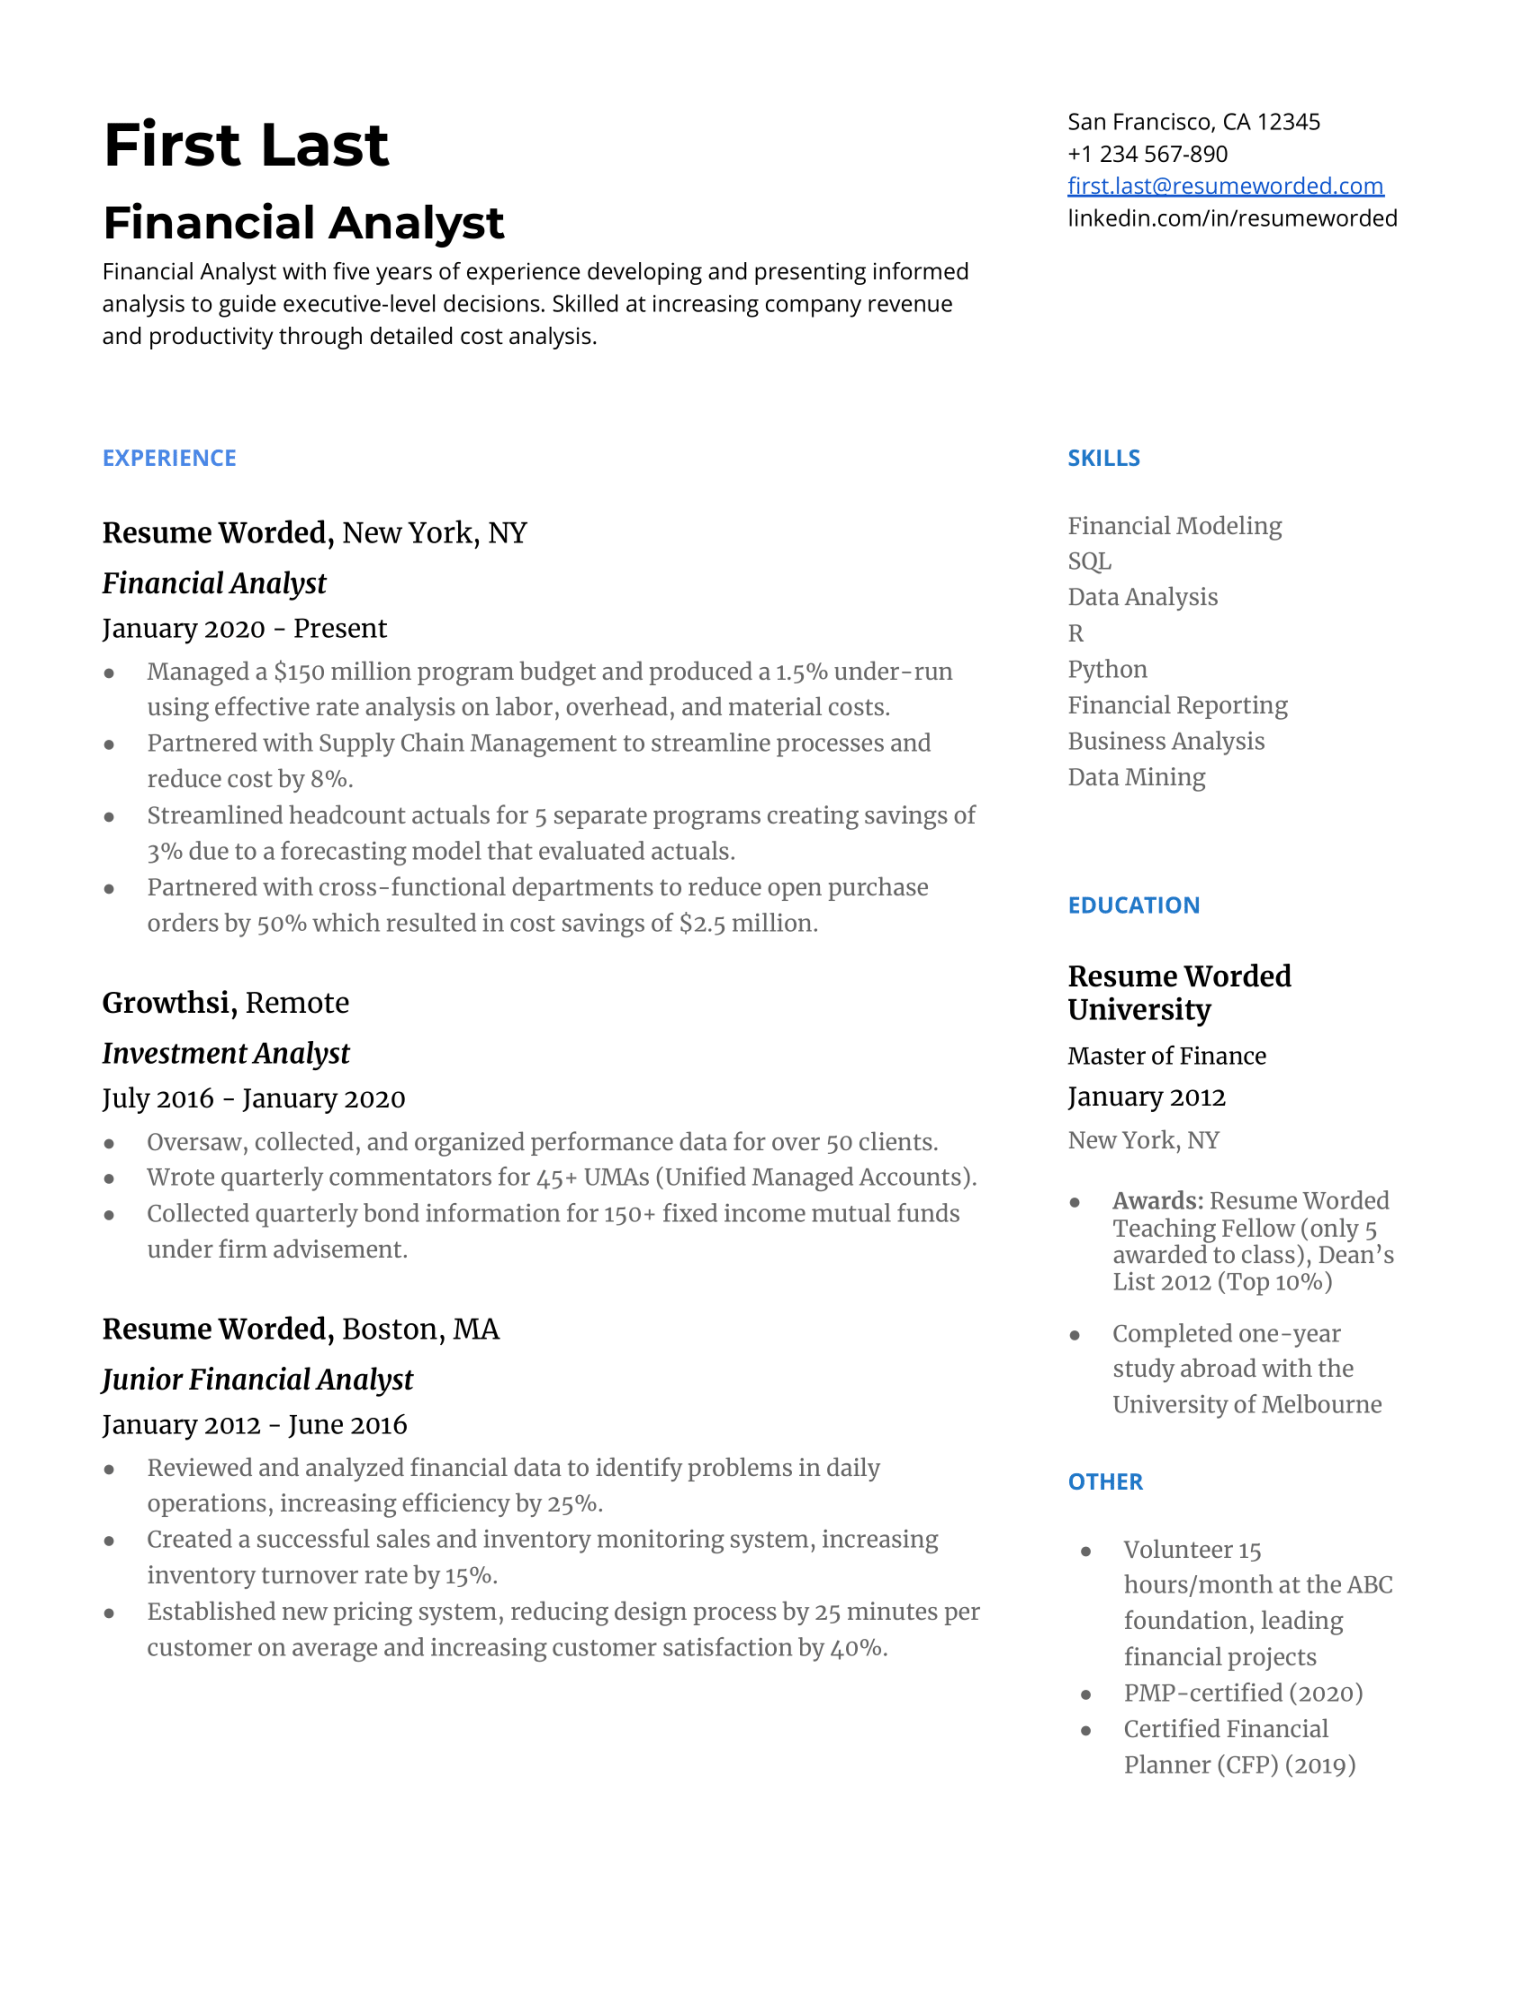 Financial Analyst Resume Examples for   Resume Worded